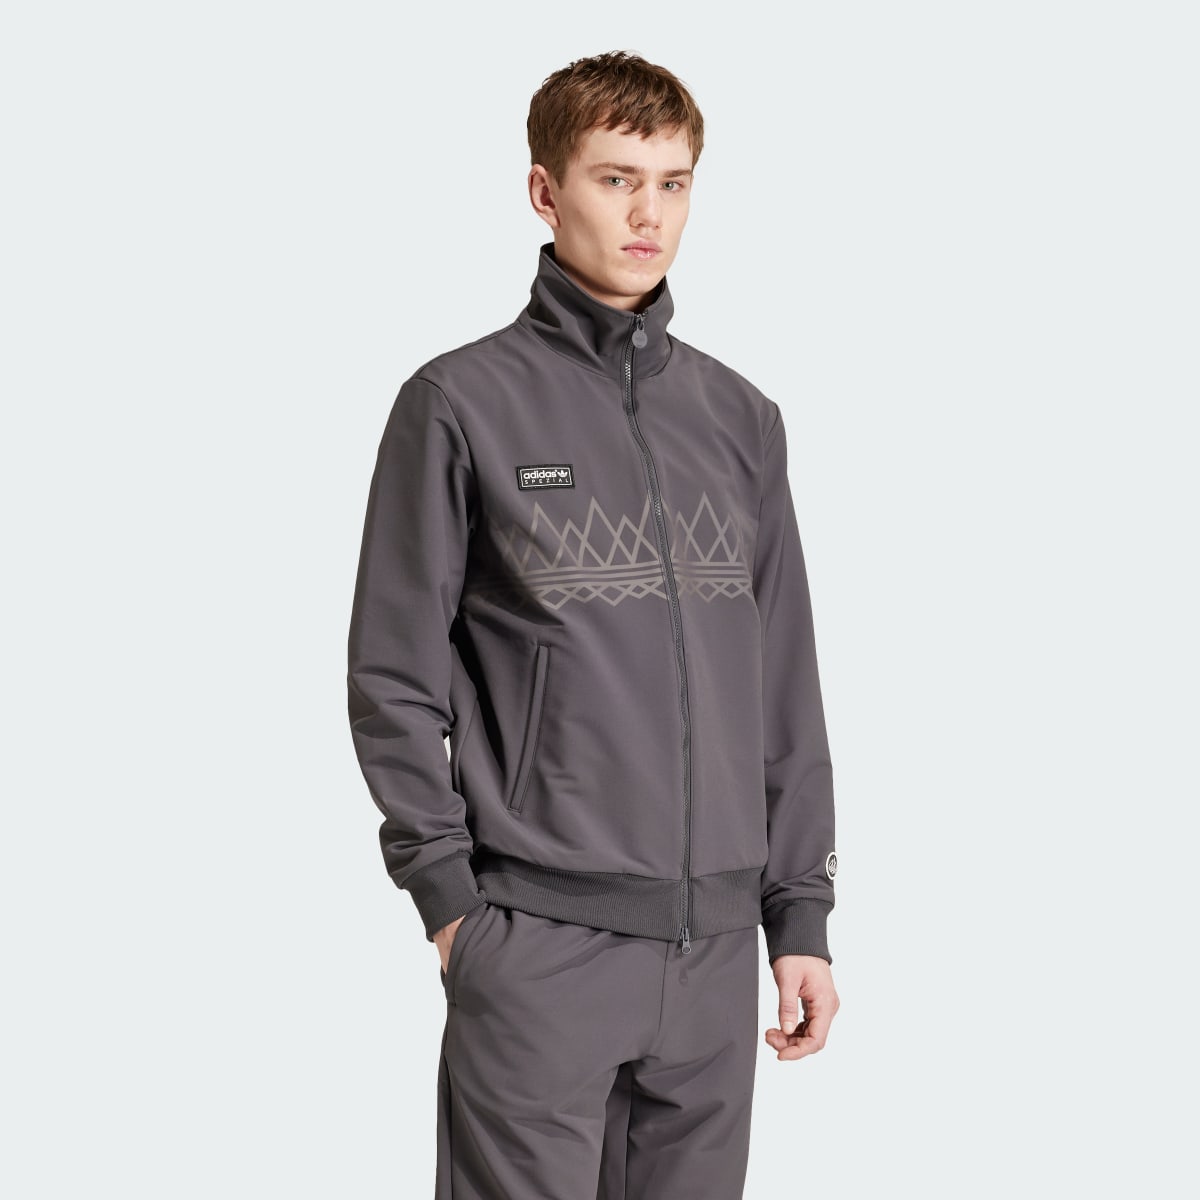 Adidas Suddell Track Top. 5